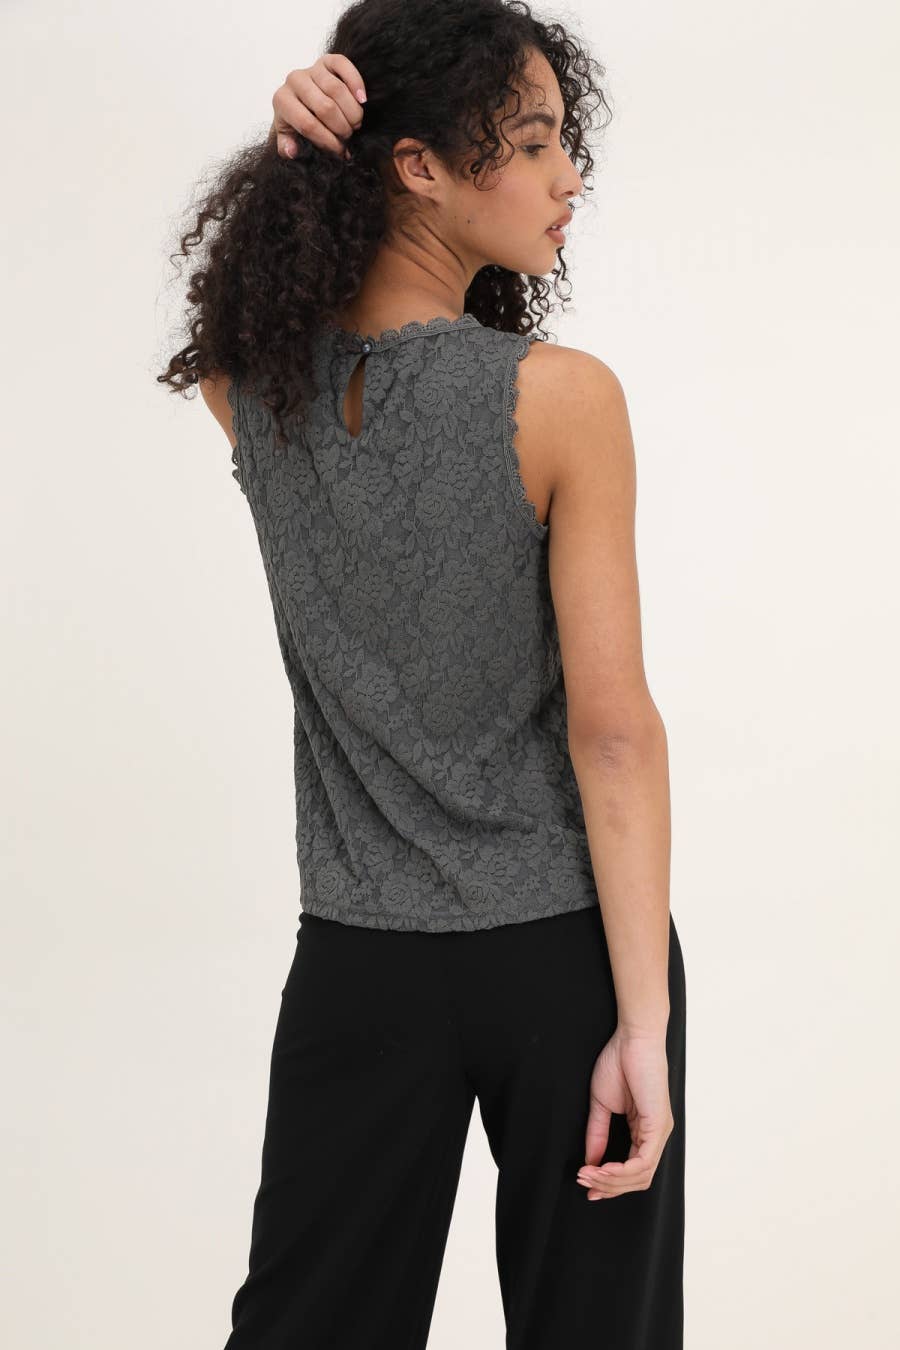 Anais sleeveless lace top - 80825: 1 S - 1 M - 1 L - 1 XL / Grey - Out of the Blue